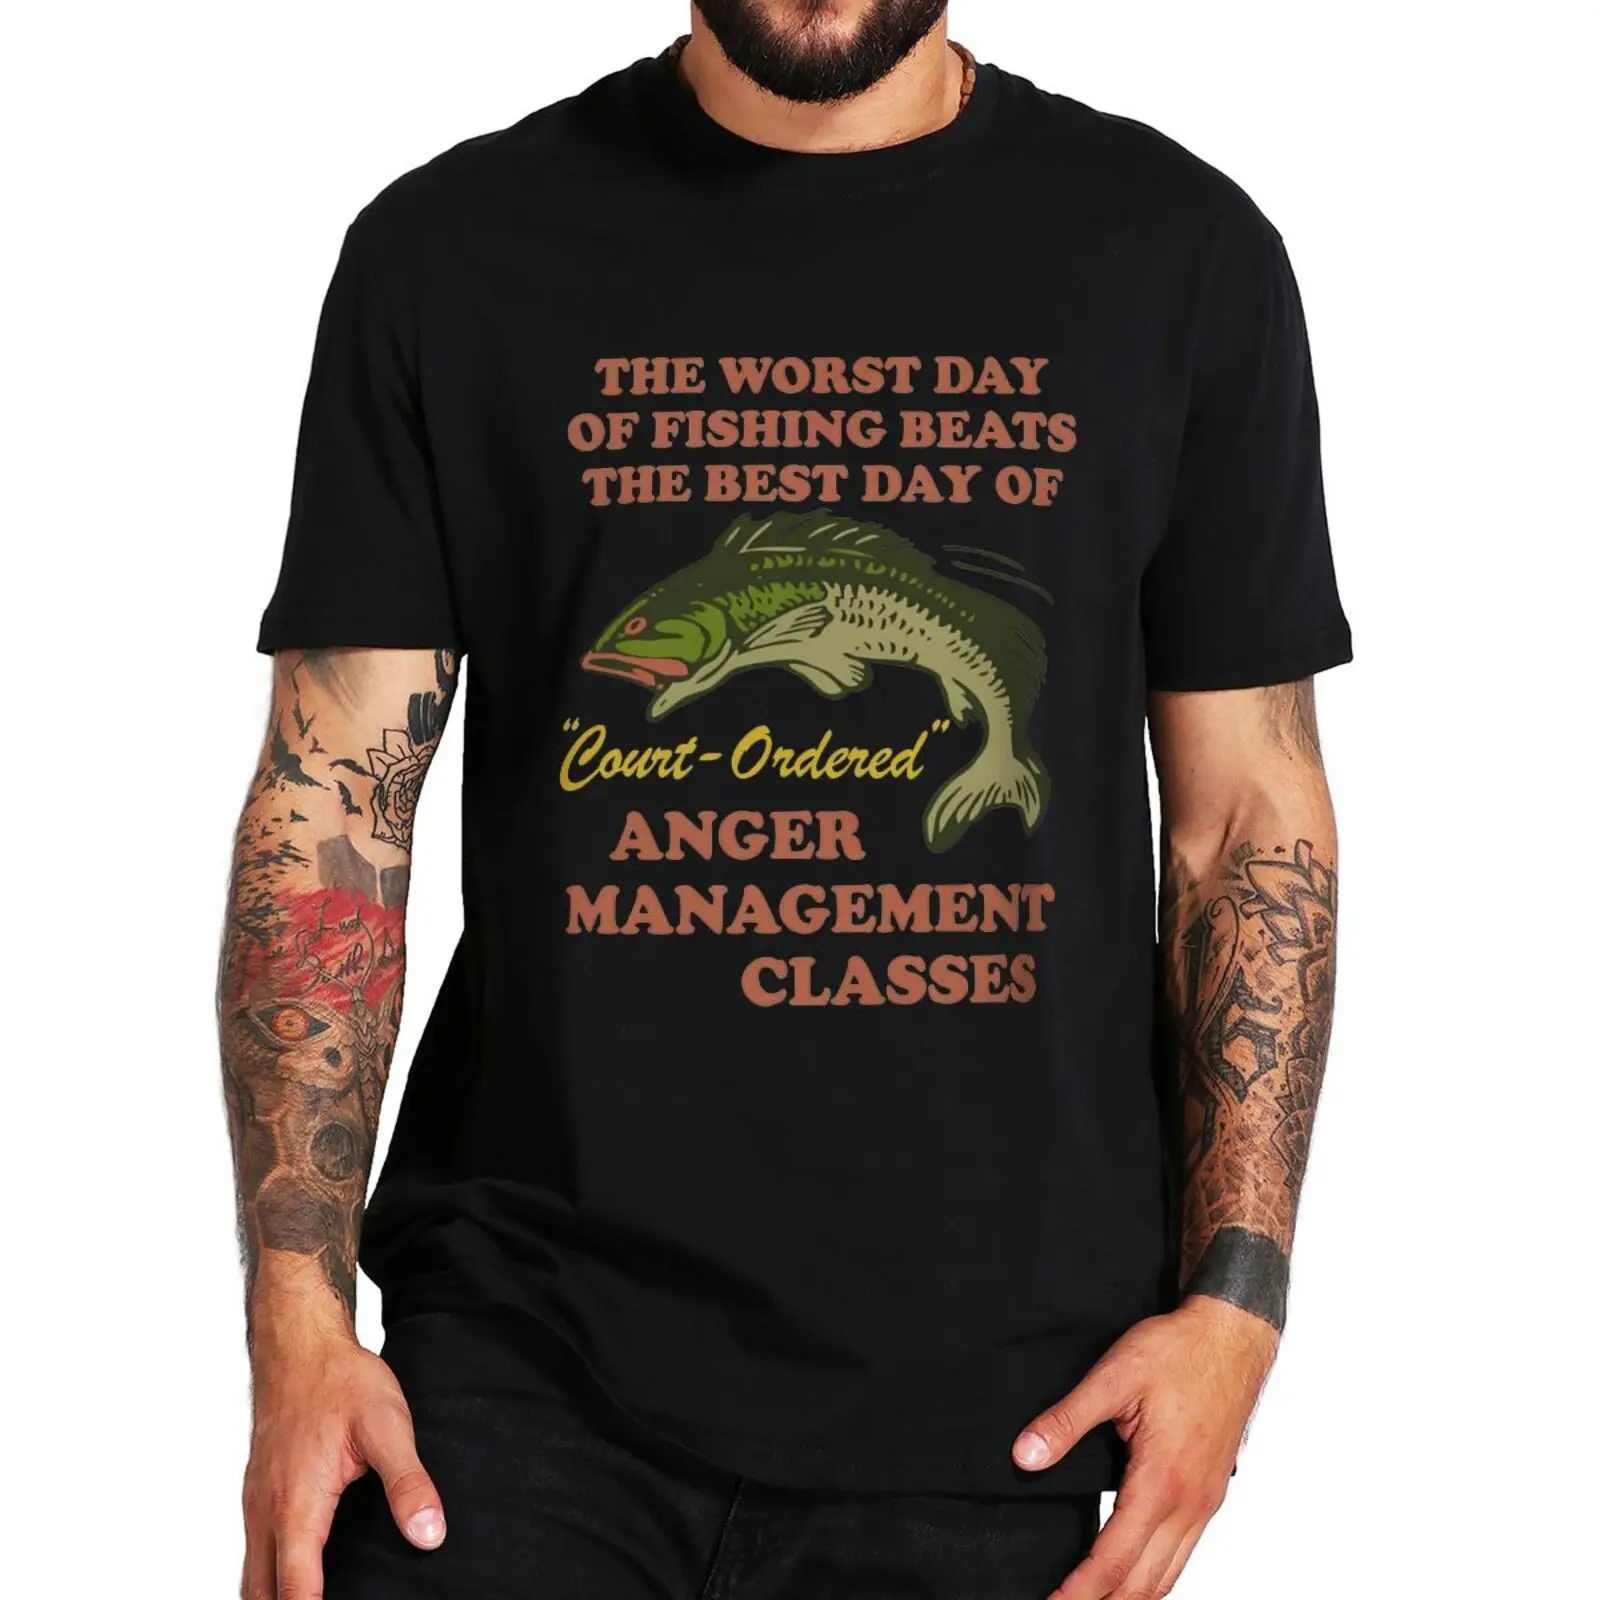 

The Worst Day of Fishing Beats T Shirt Best Day of Court Ordered Anger Management Sessions Pure Cotton Tops Tee EU Size